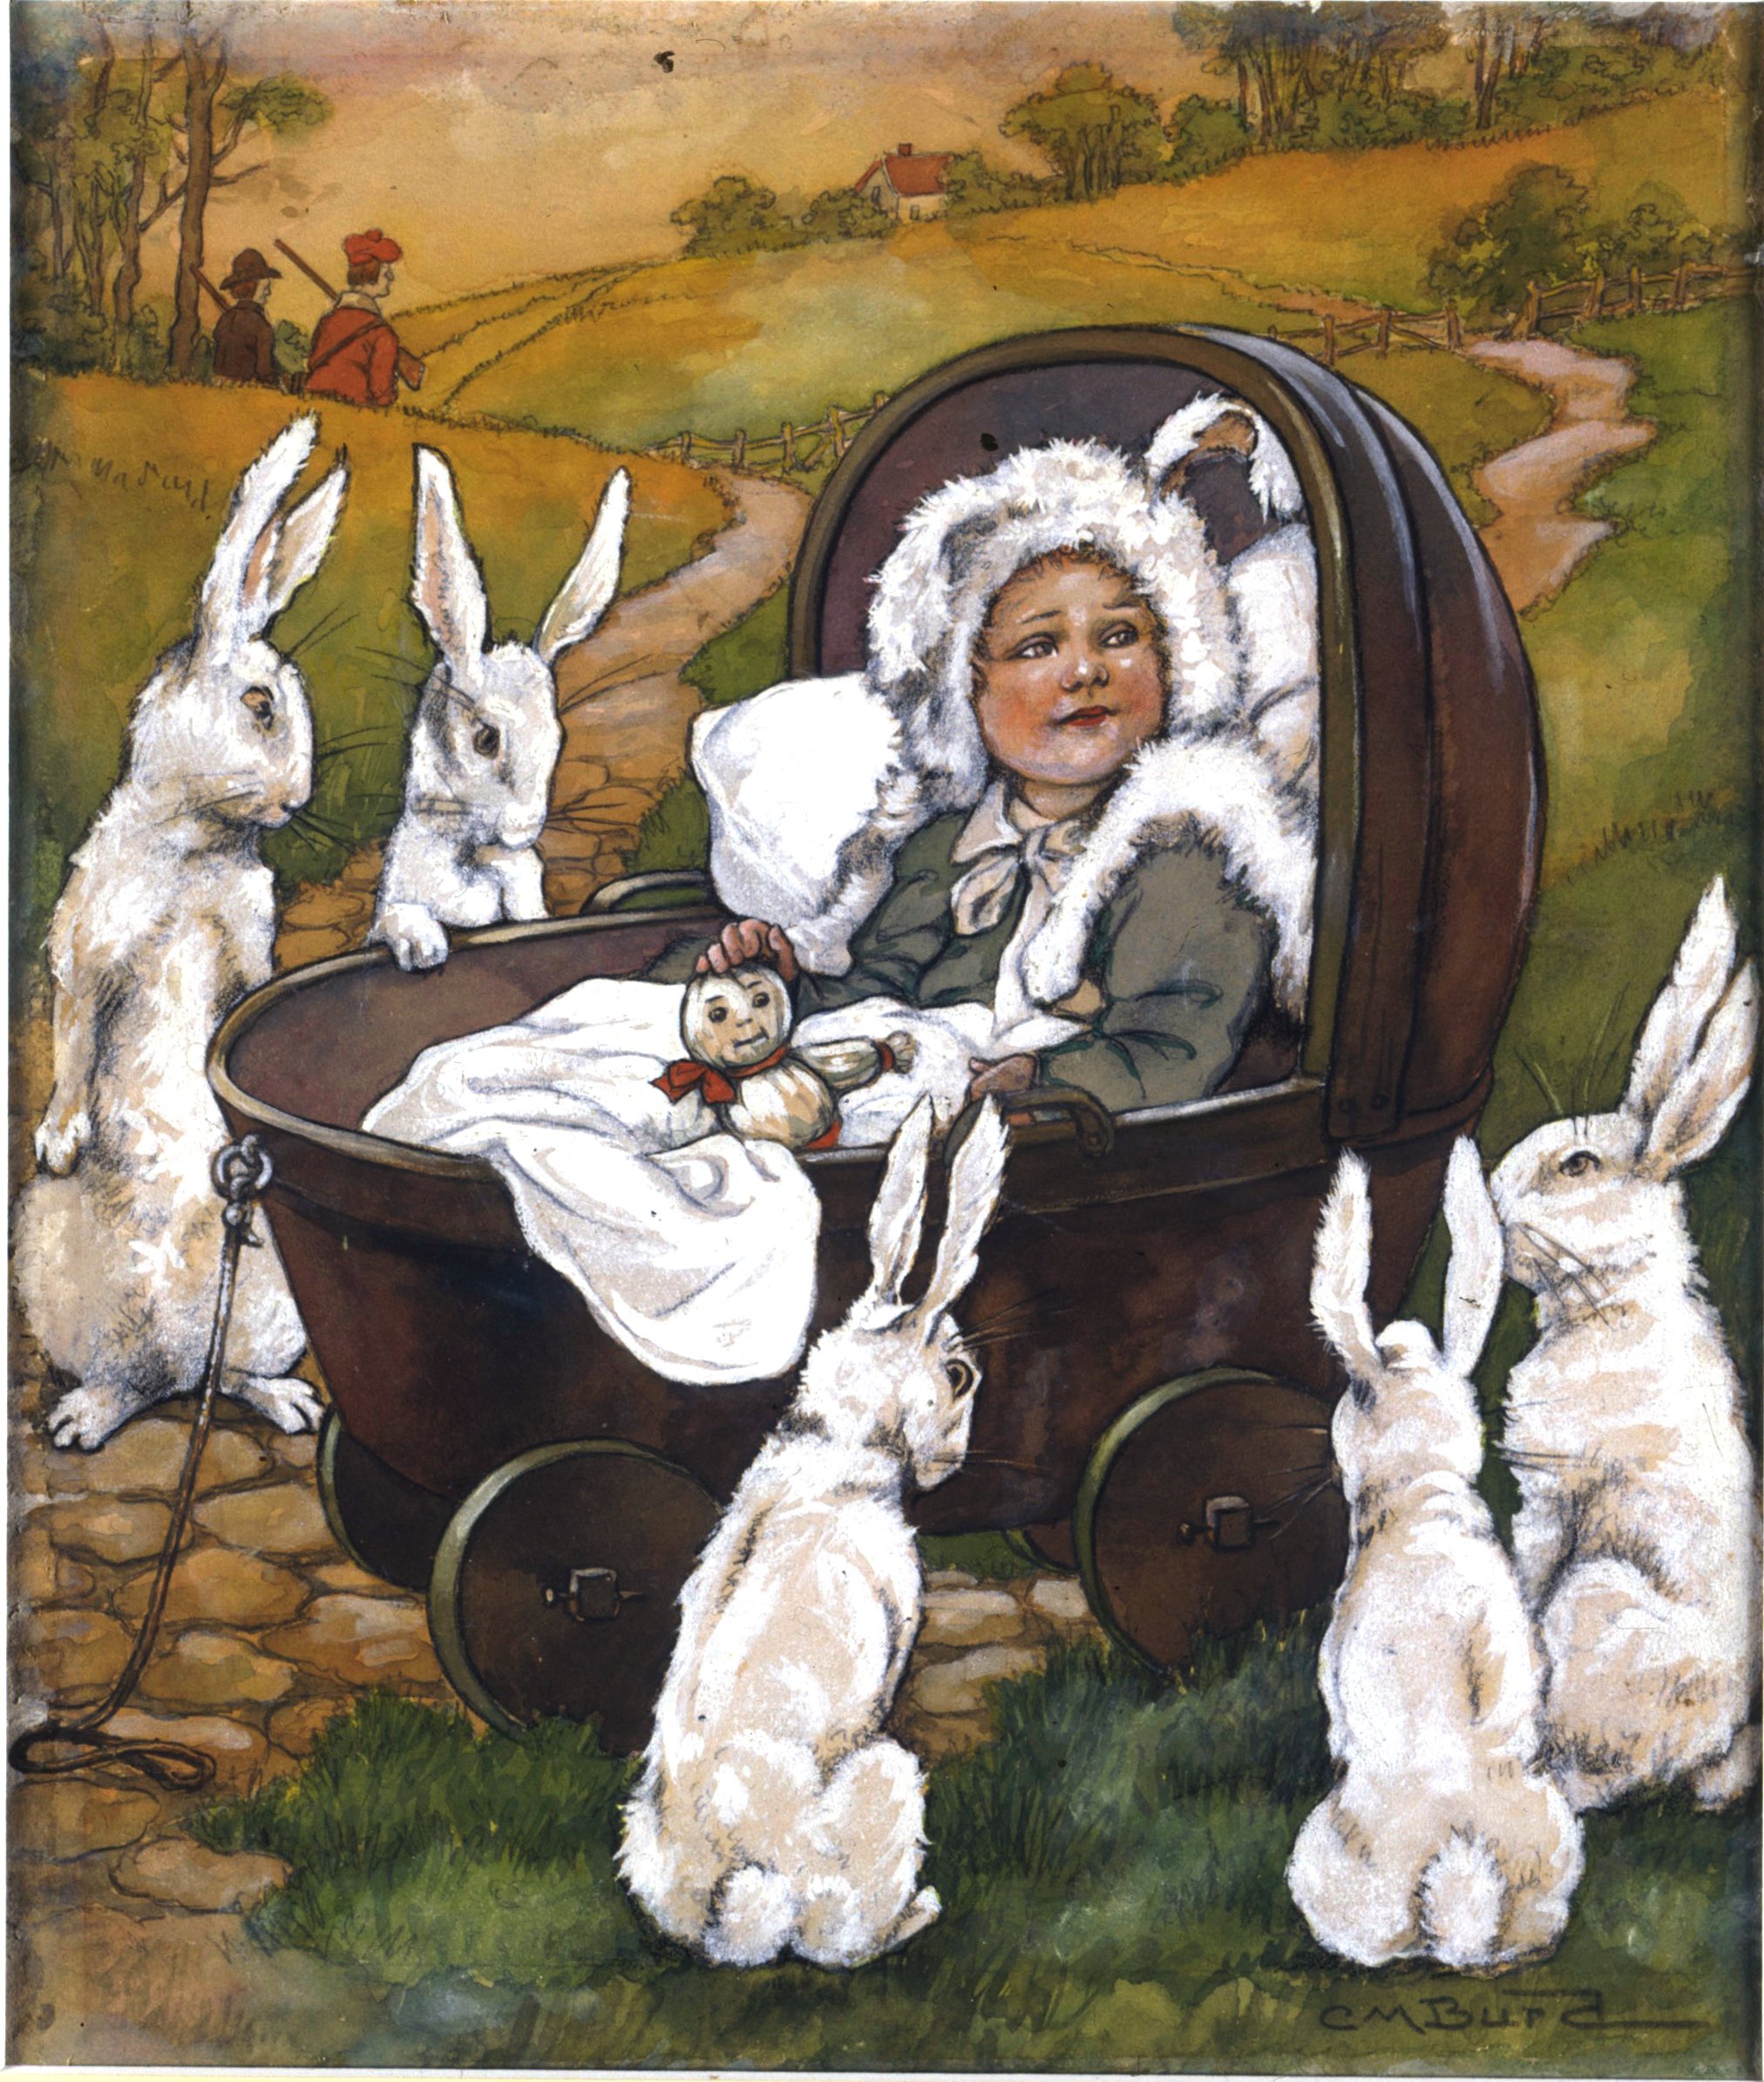   Clara Burd (1873-1933)   Baby in Carriage Surrounded by Rabbits  1926, gouache, watercolor and pencil on illustration board 12” x 14”, signed lower right  The Kiddies Wonder Box,  by Josephine Lawrence, Supples &amp; Leon, 1926 